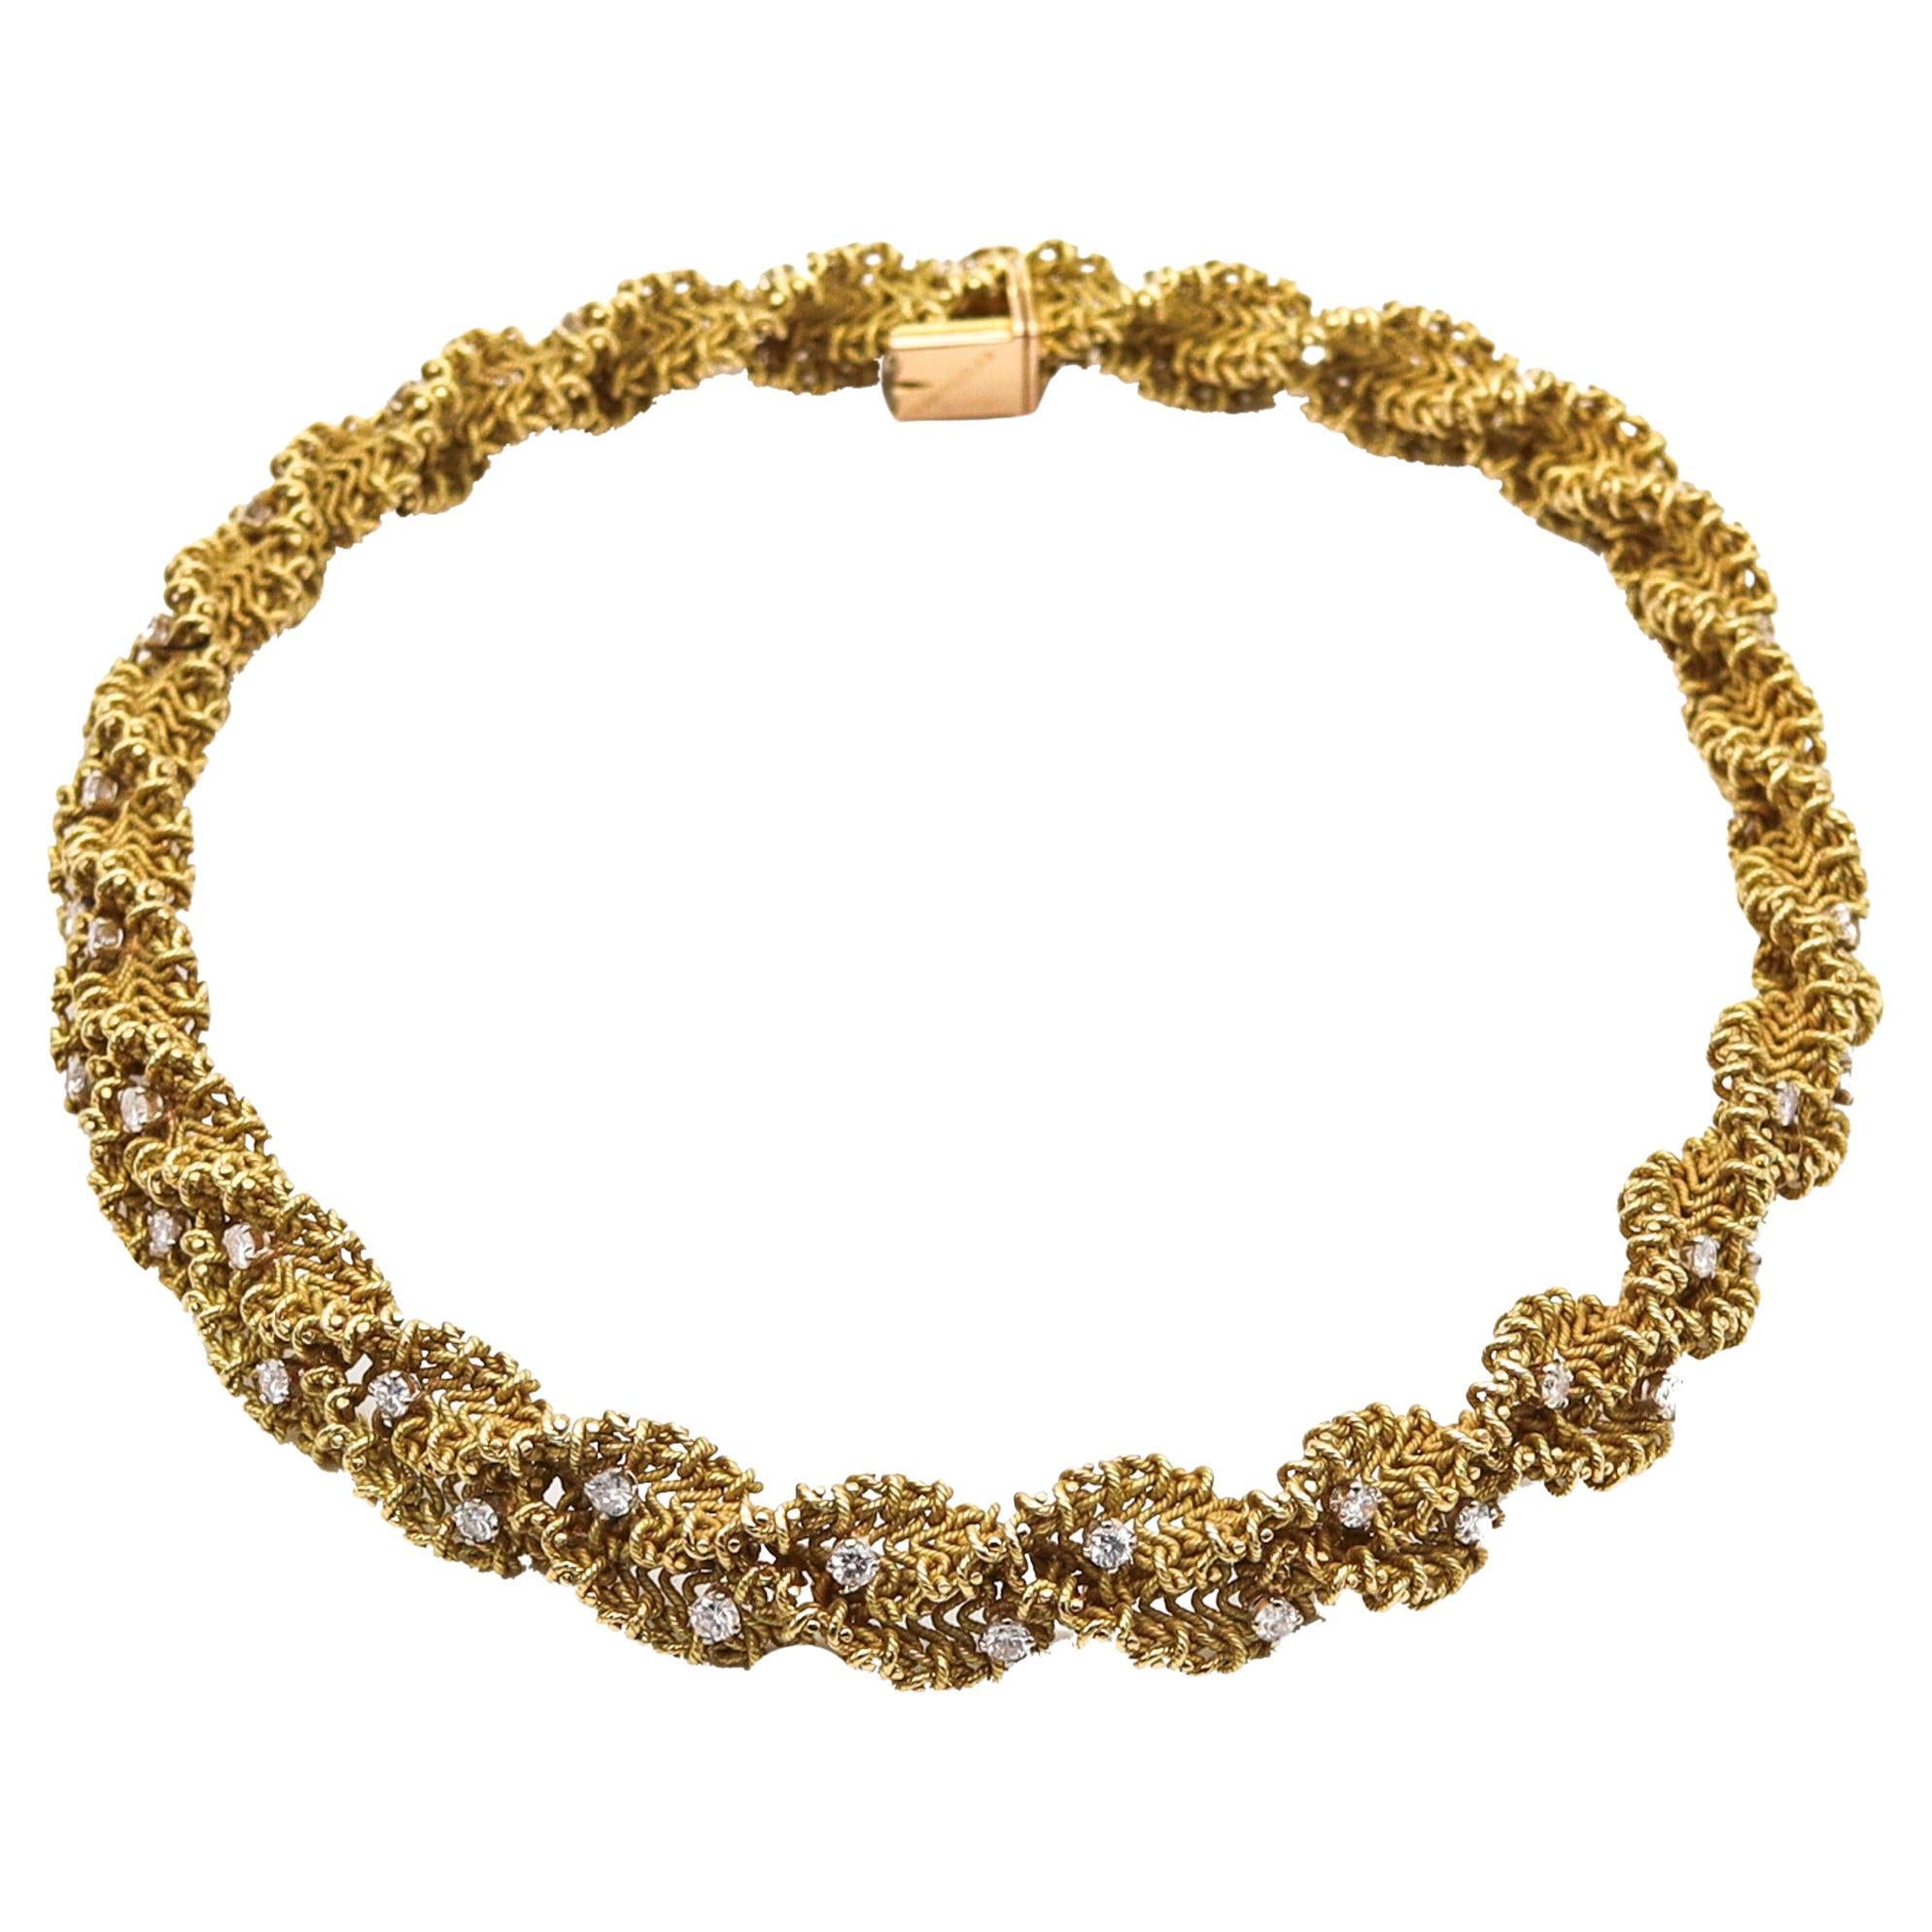 Chantecler 1960 Textured Twisted Necklace In 18Kt Gold With 5.15 Ctw In Diamonds